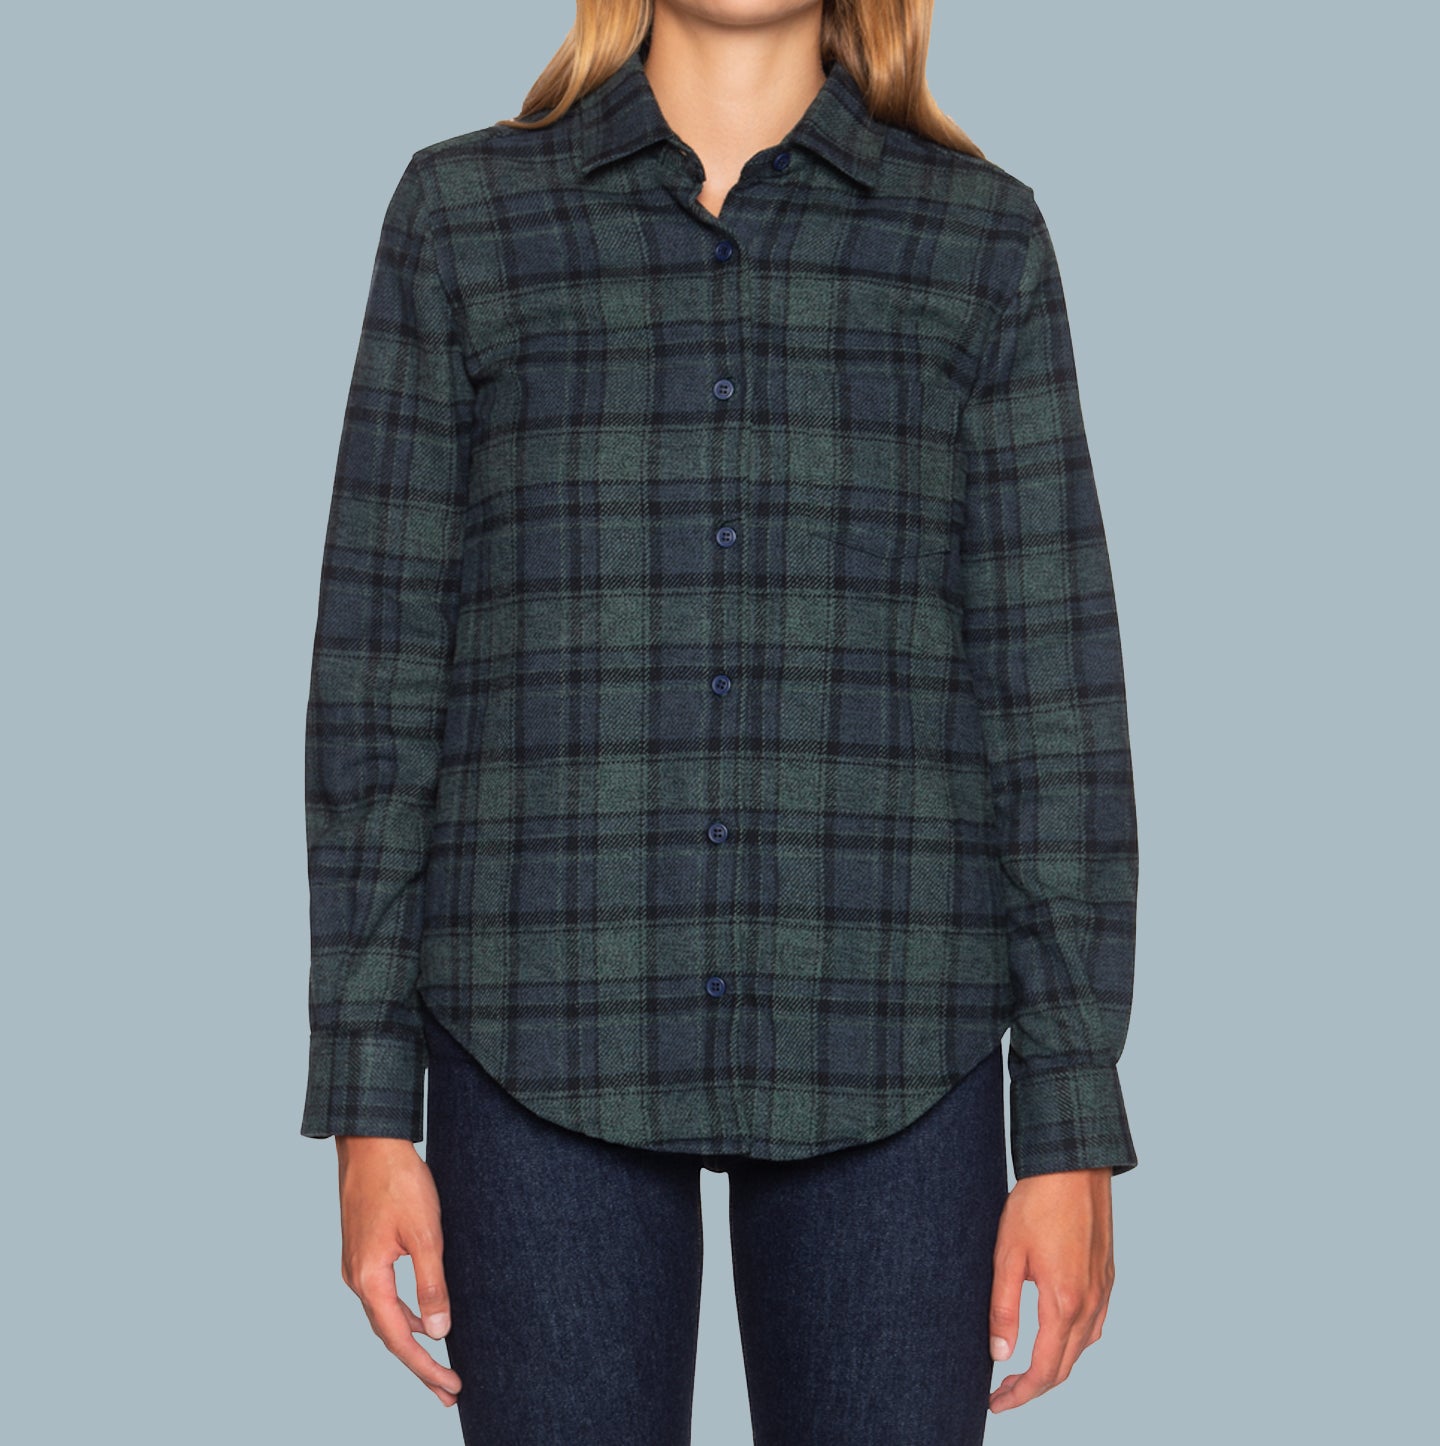 Women's Country Shirt - Heavy Vintage Flannel - Blue/Green